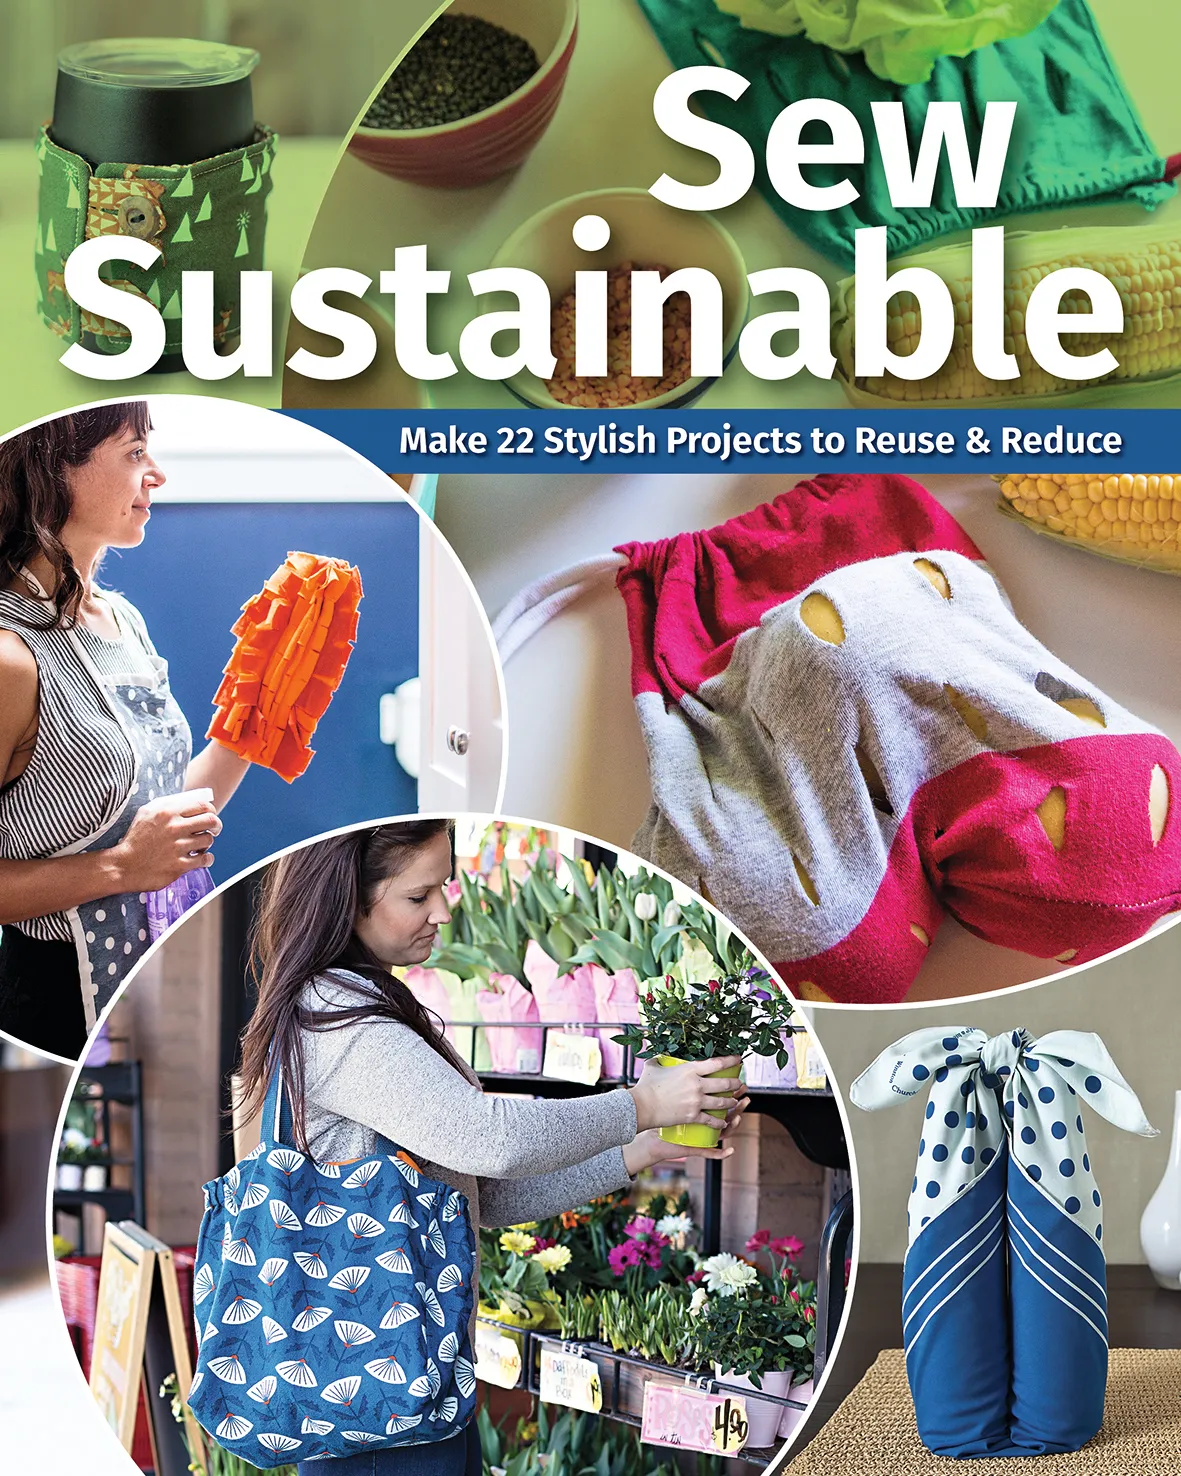 Sew Sustainable book